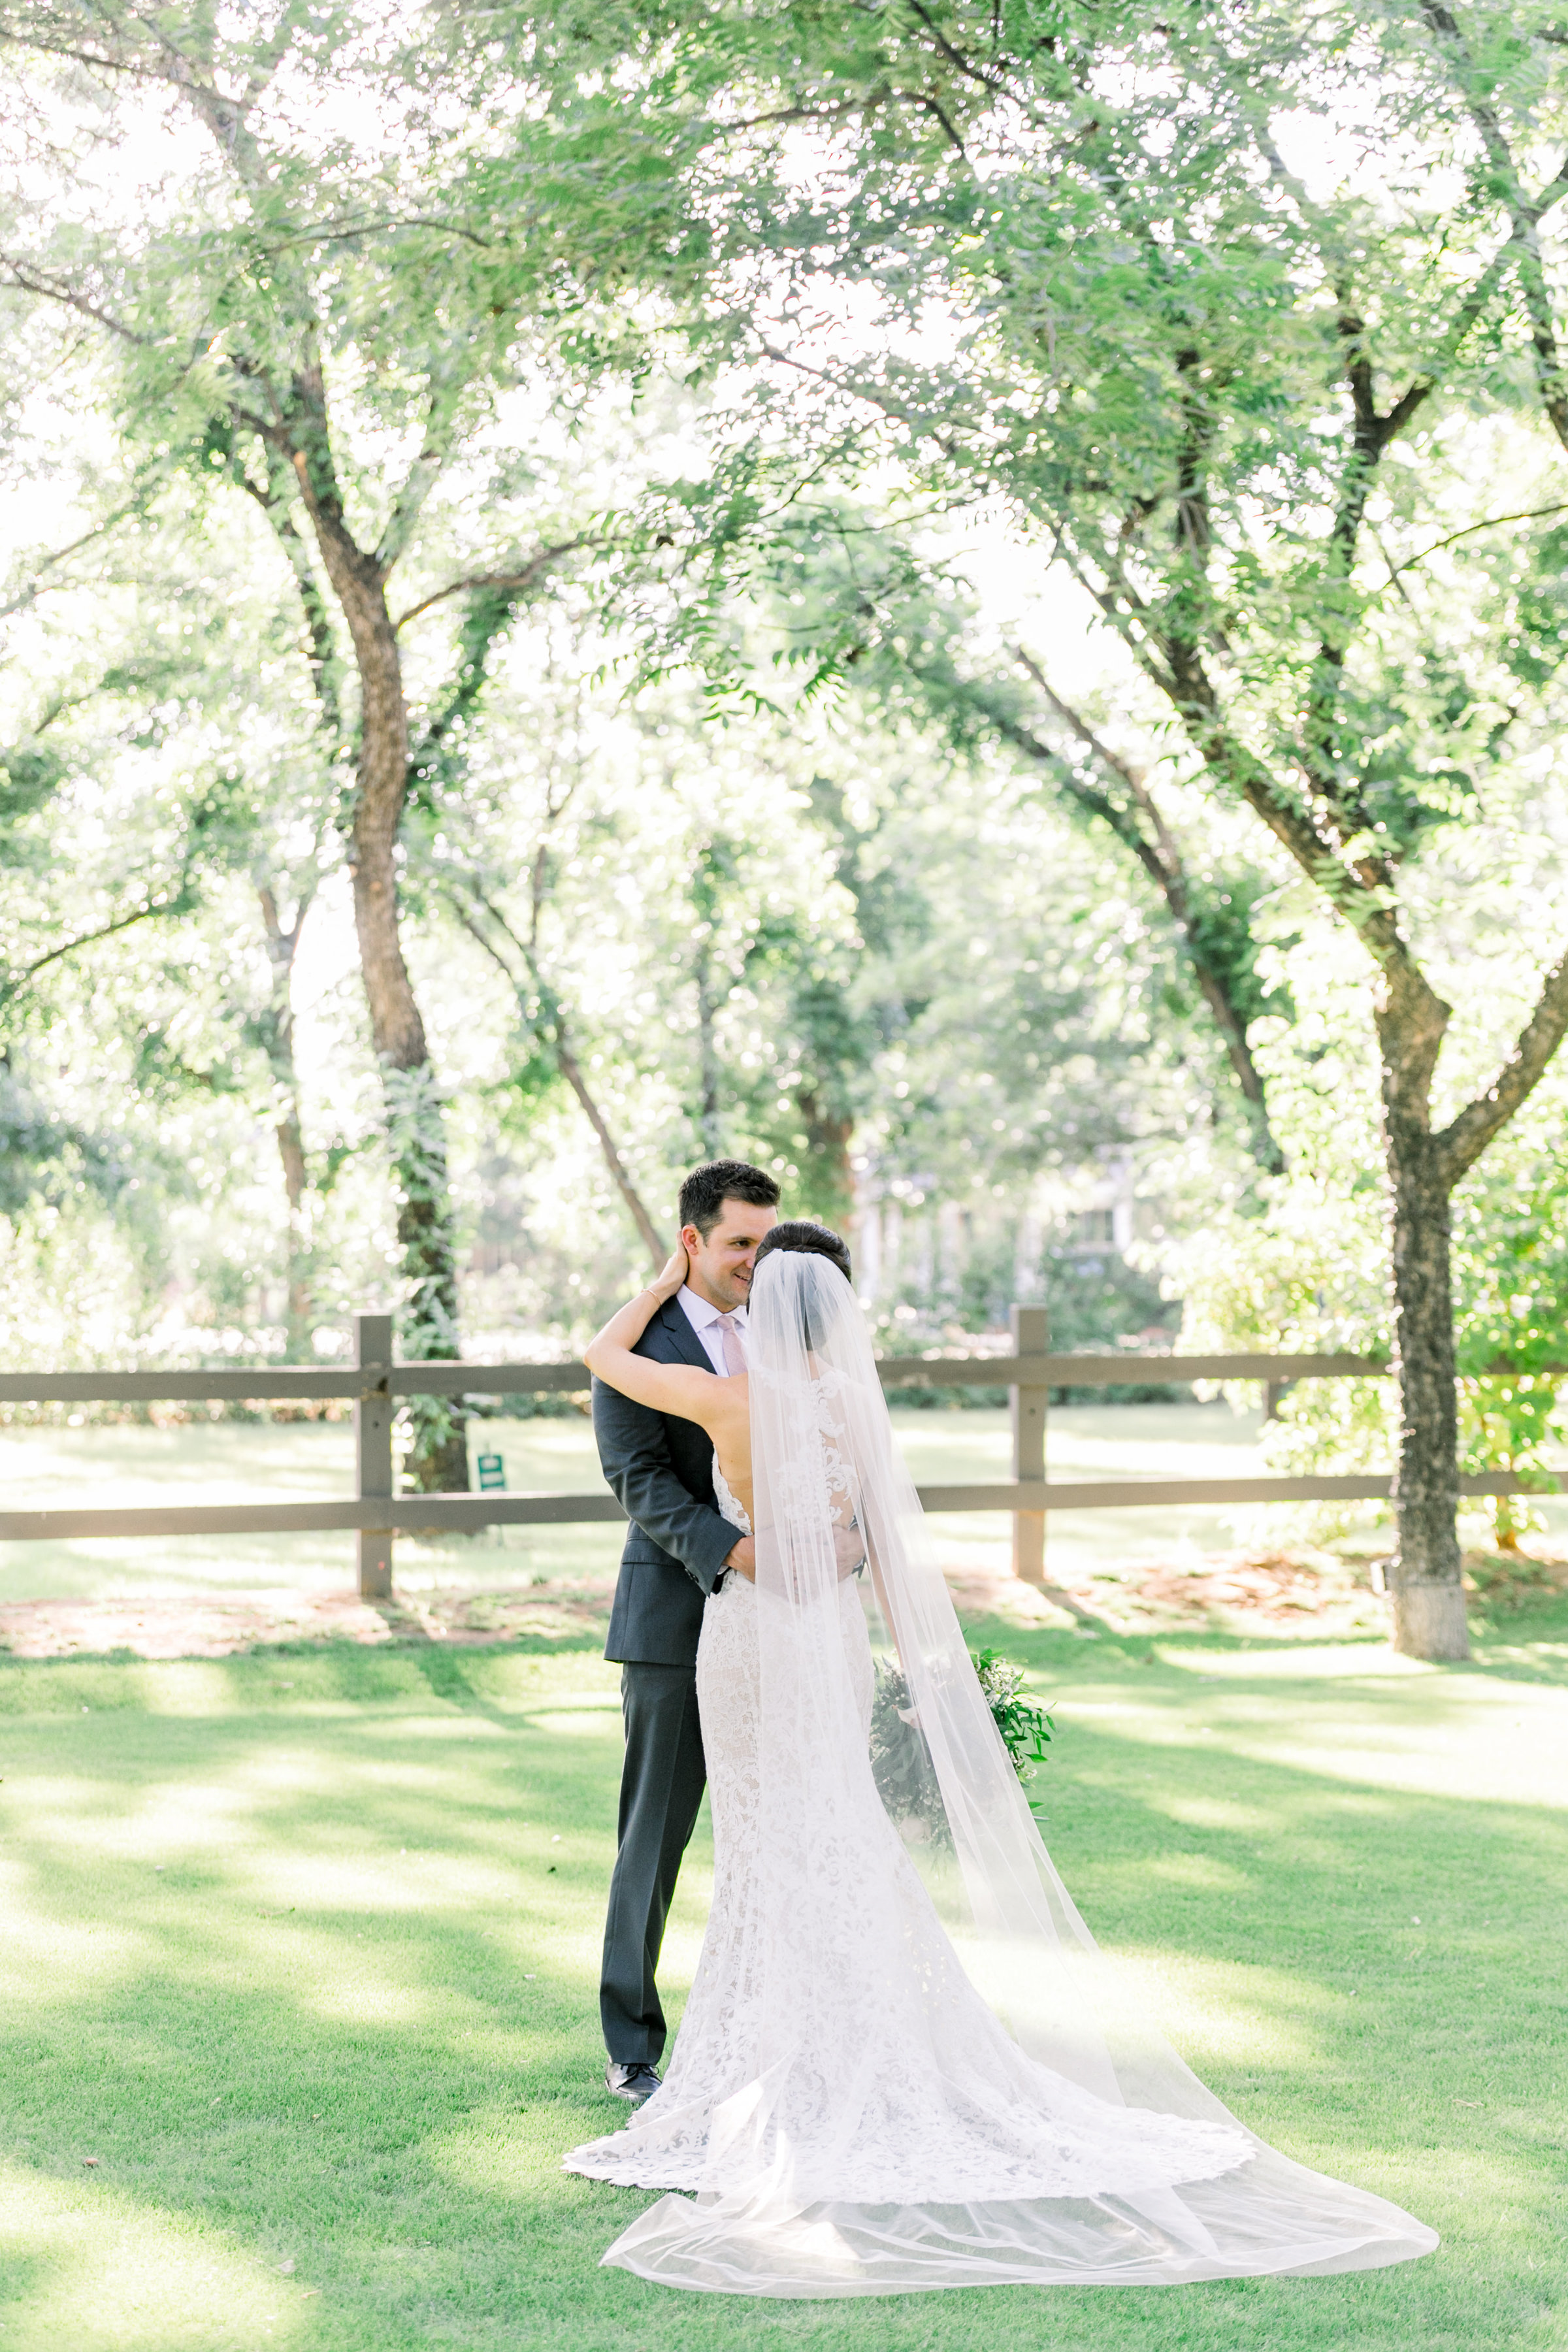 Karlie Colleen Photography - Venue At The Grove - Arizona Wedding - Maggie & Grant -66